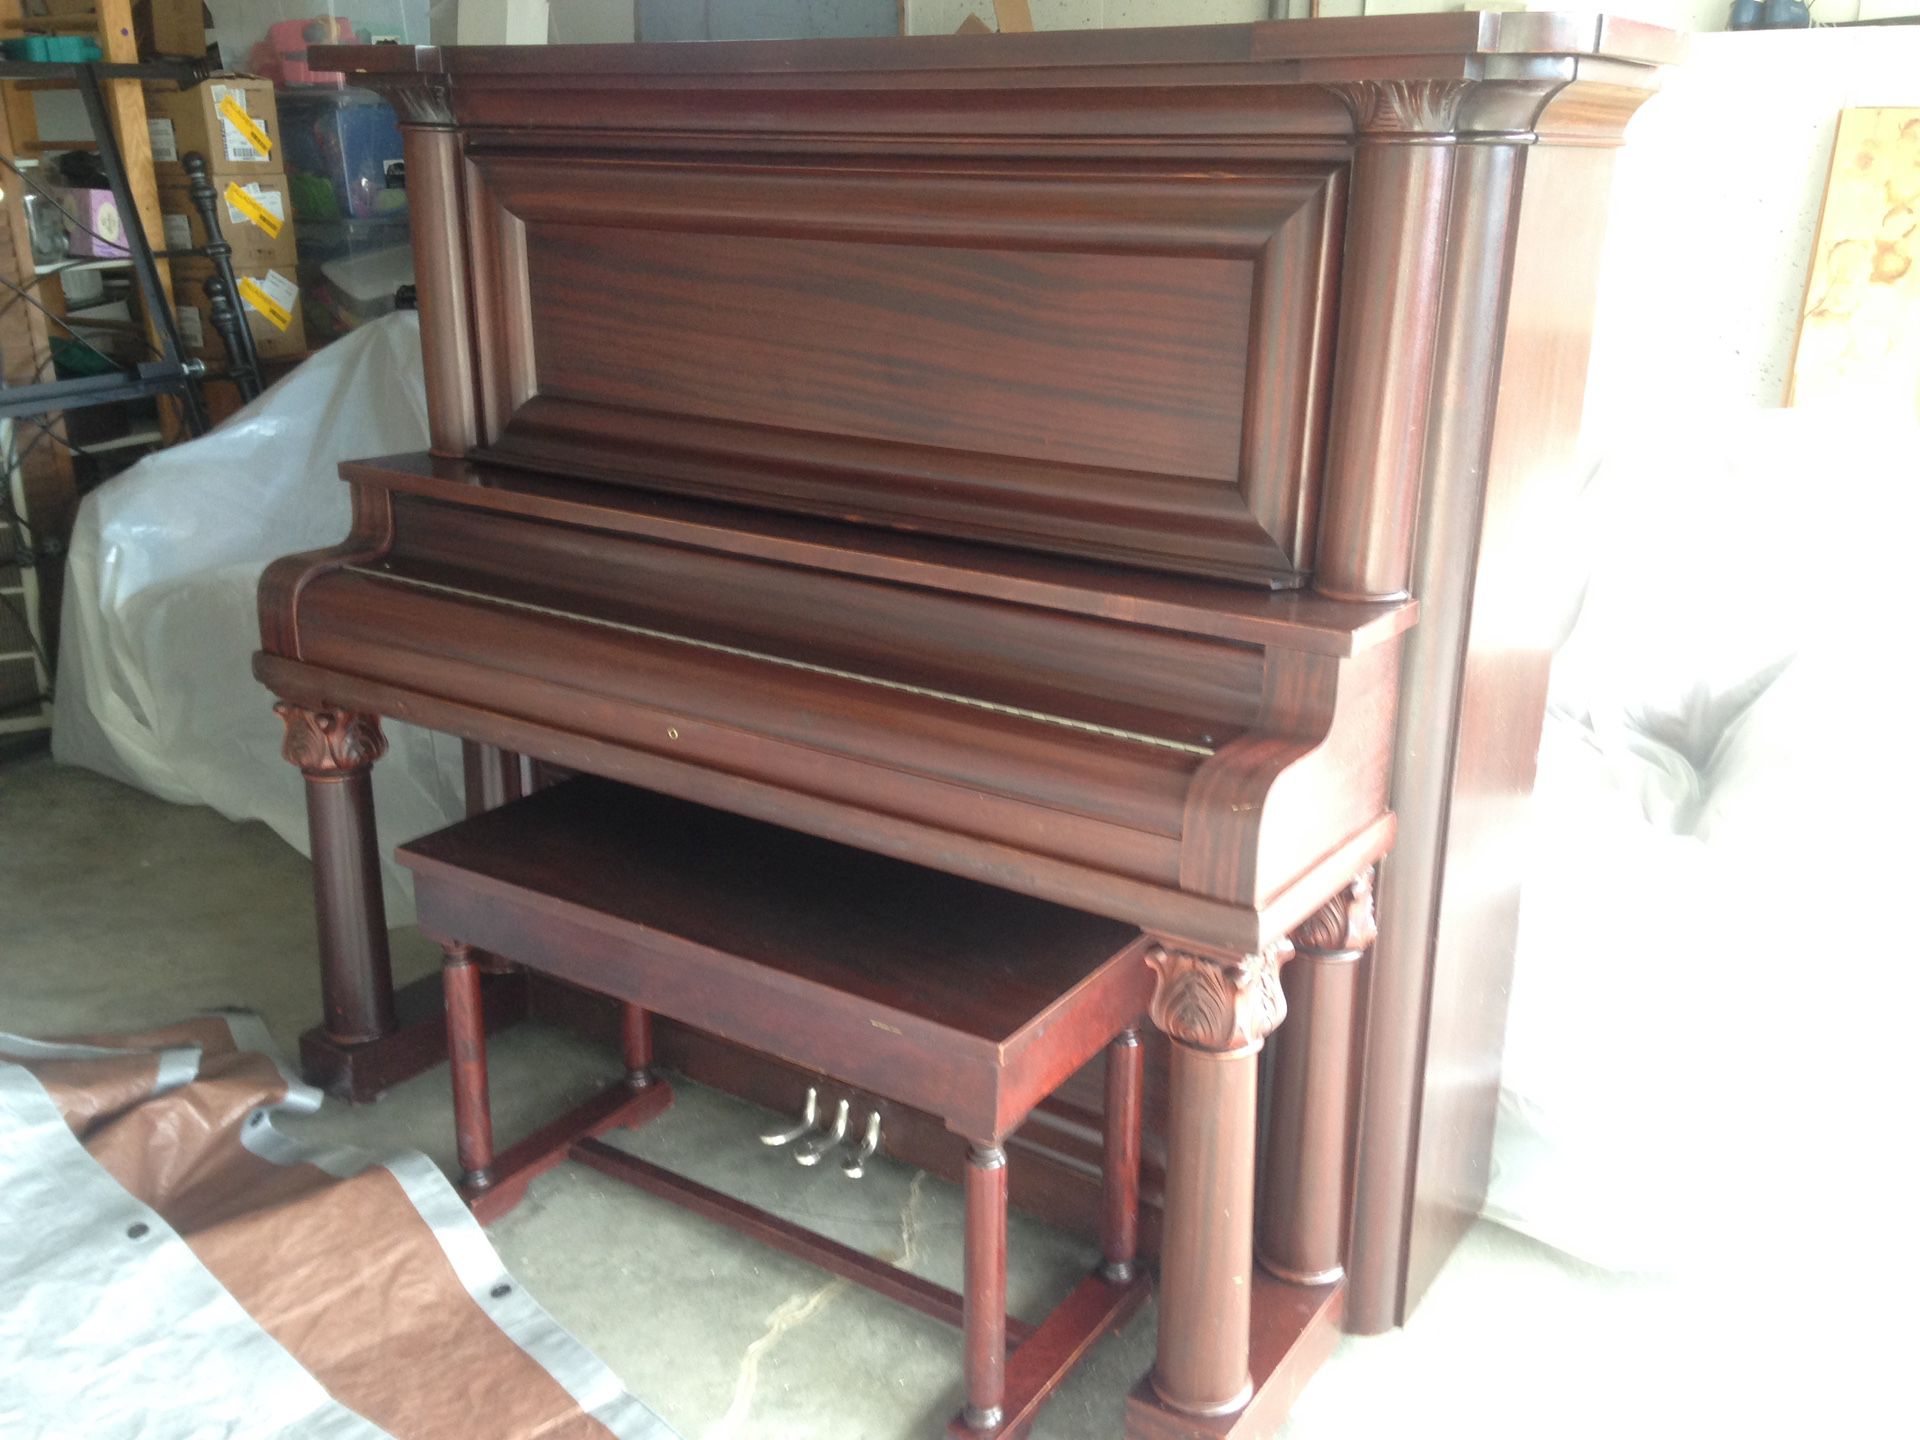 Beckwith Concert Grand Upright Piano